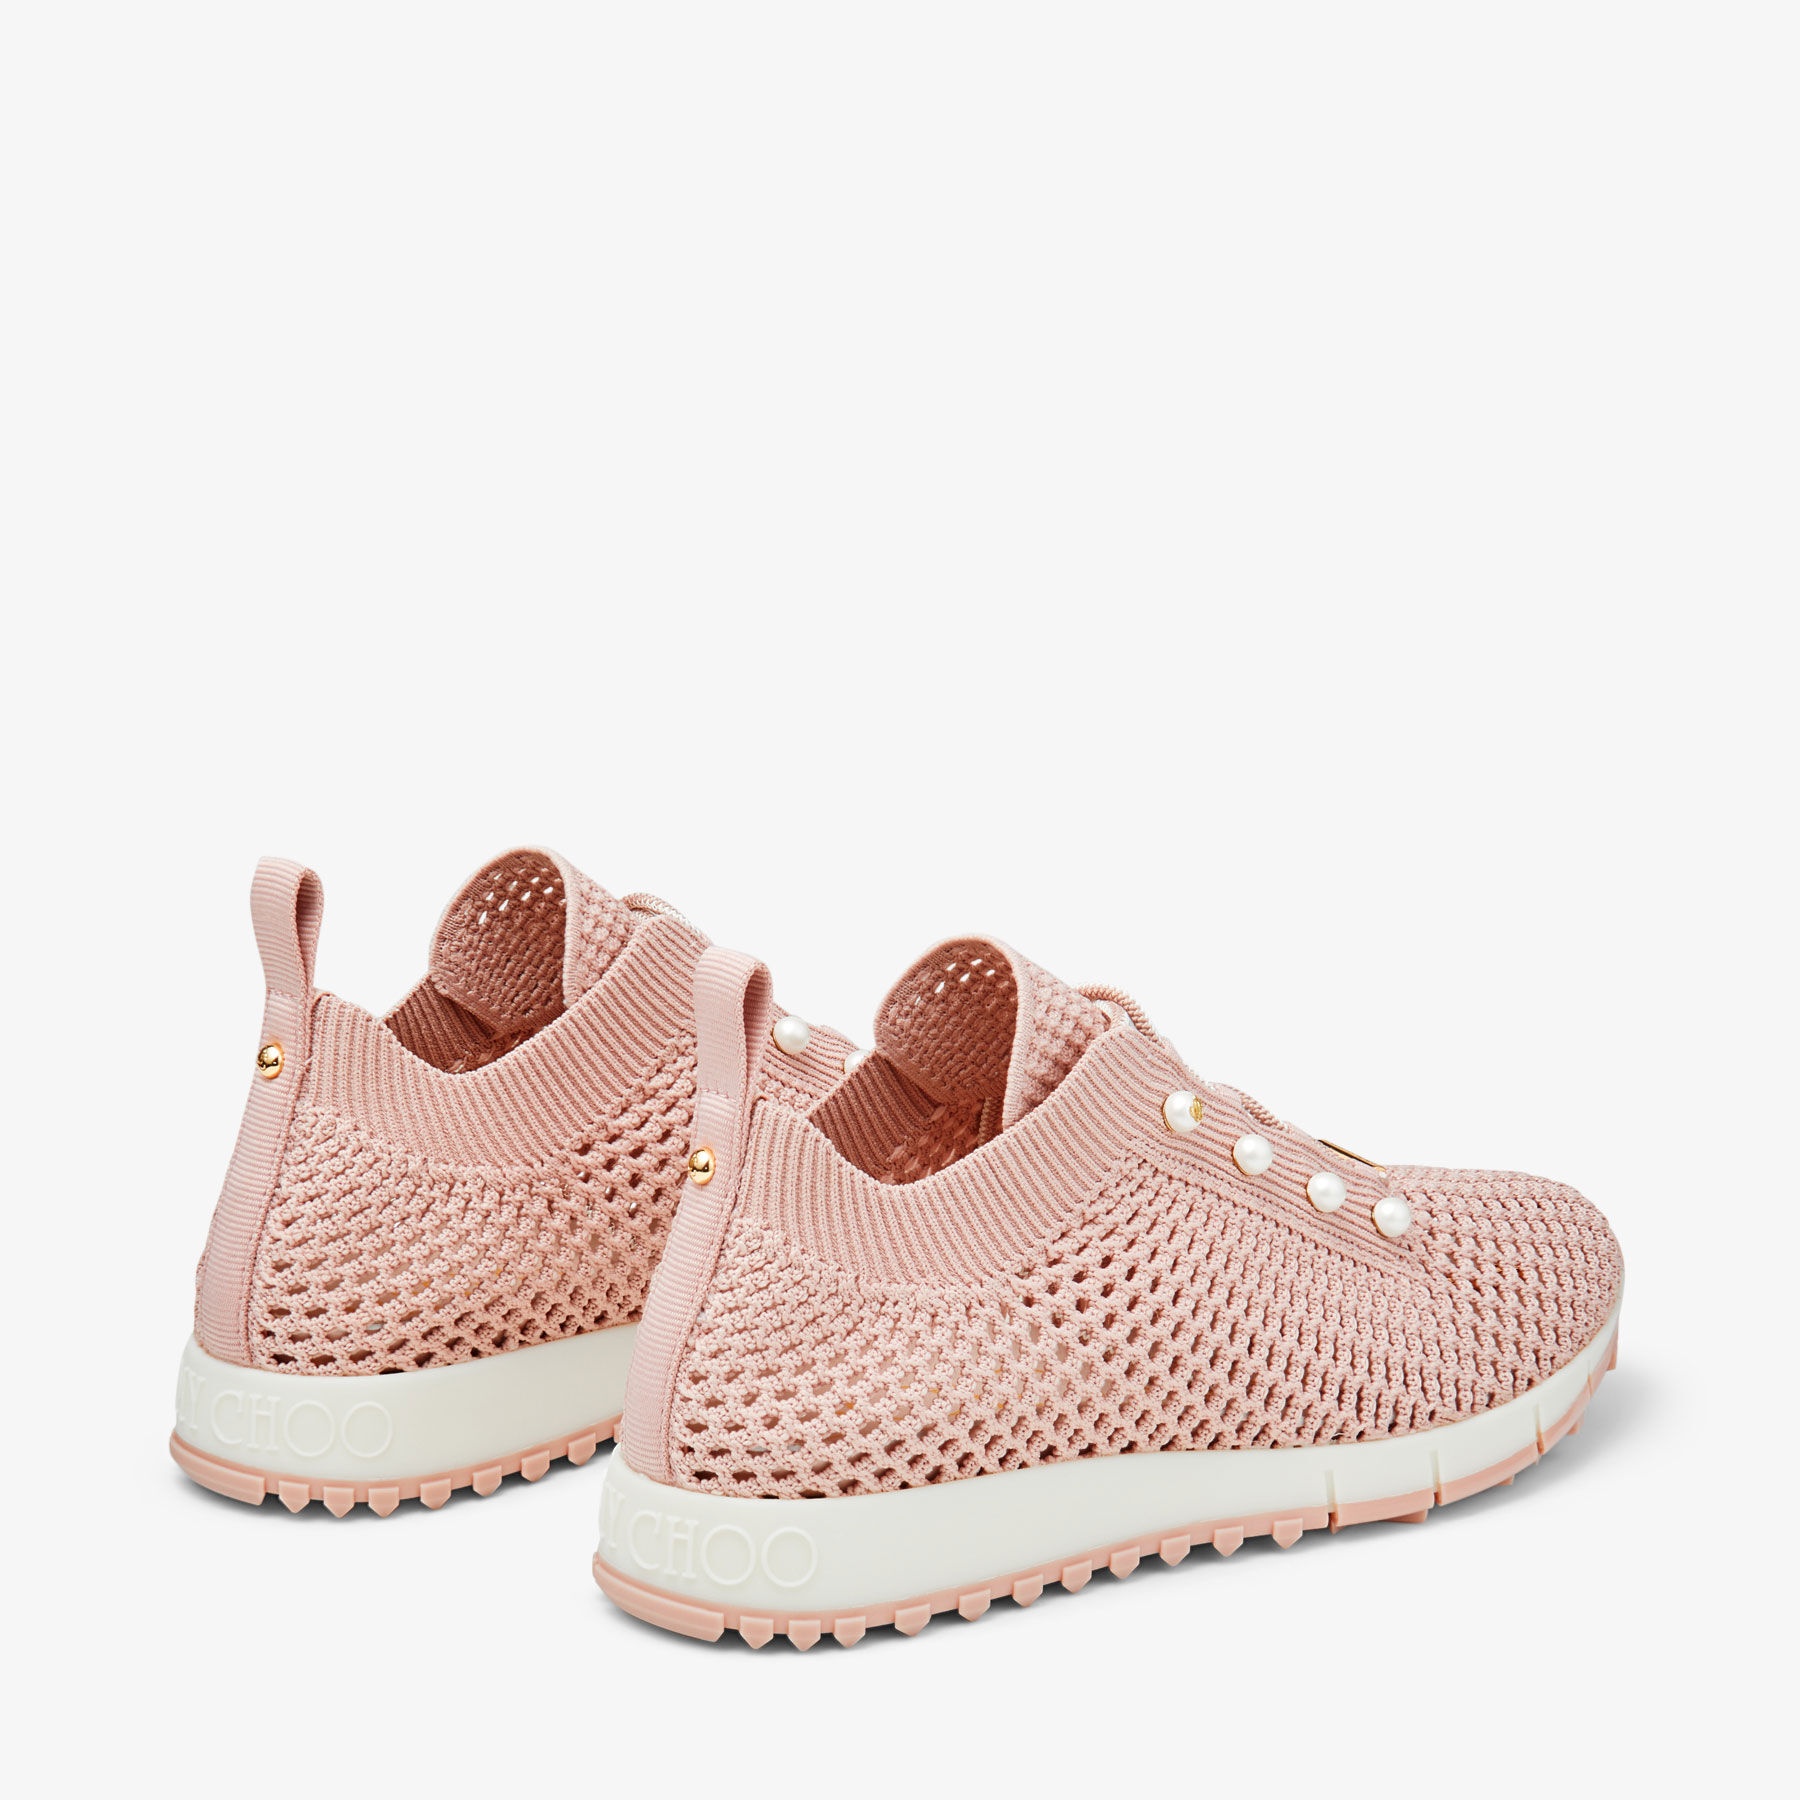 Veles
Macaron Crochet Knit Low-Top Trainers with Pearls - 6